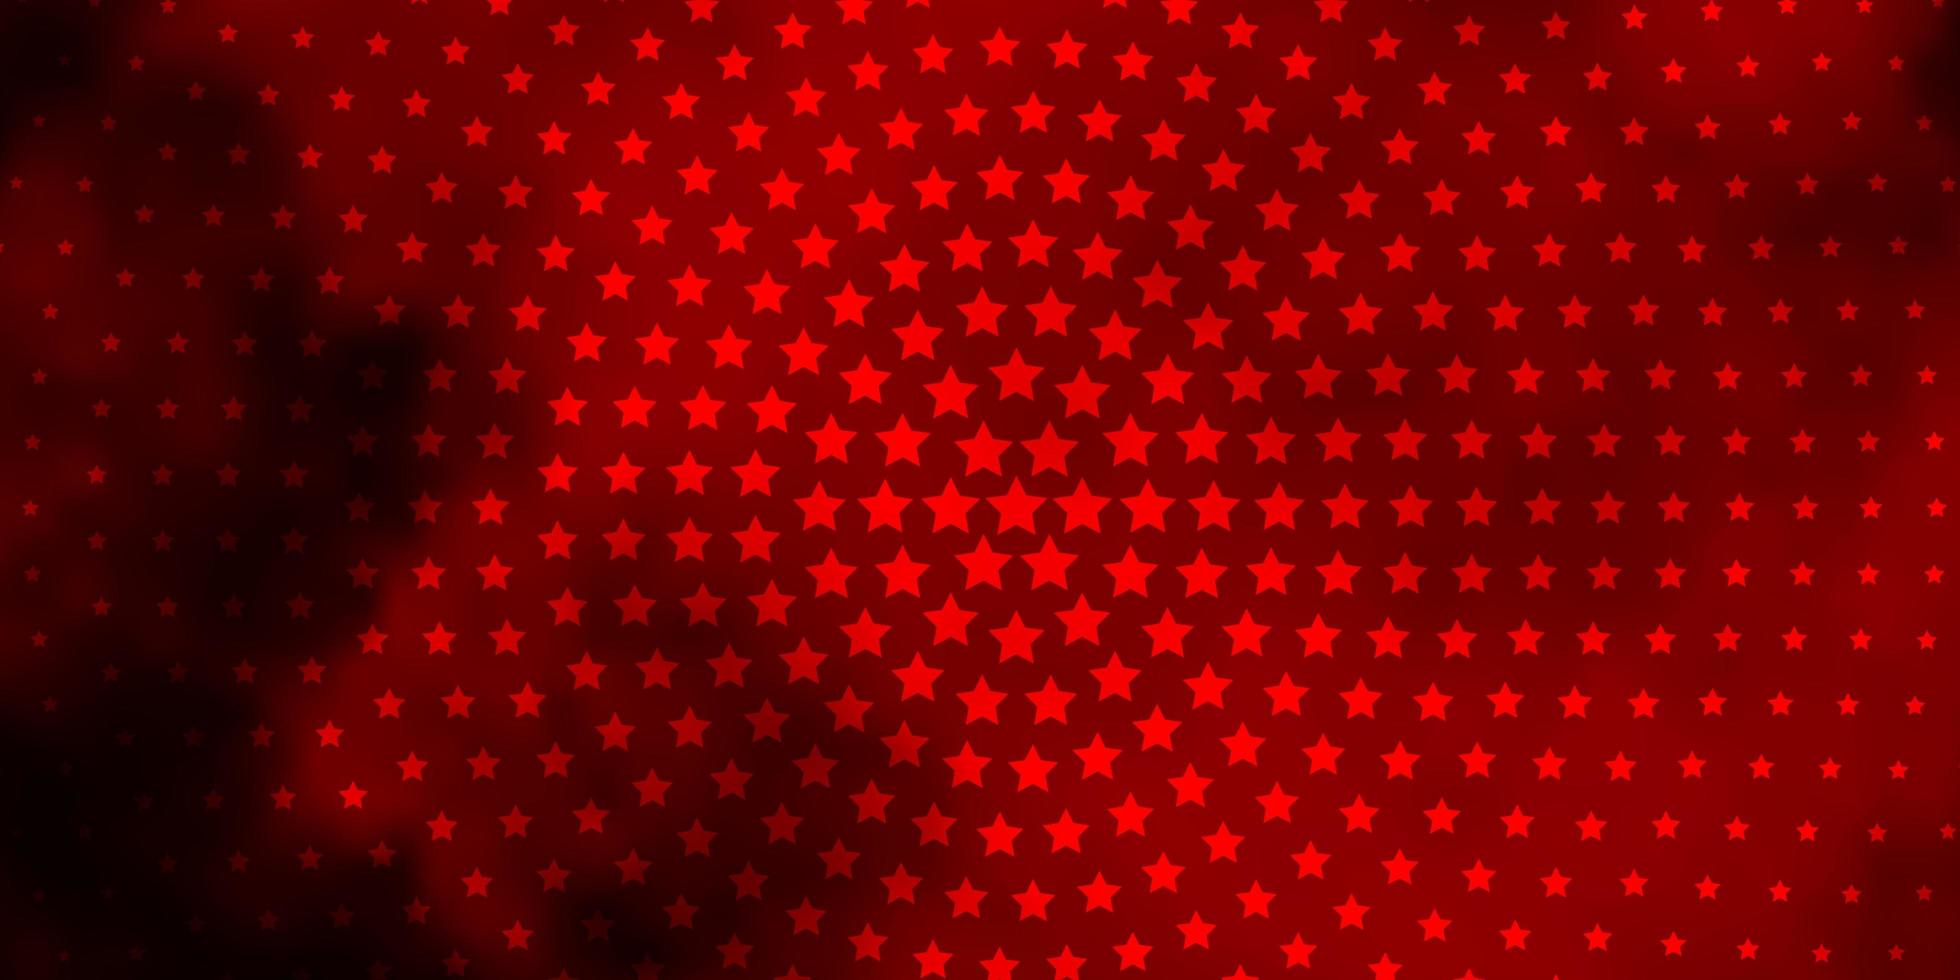 Dark Red vector layout with bright stars.